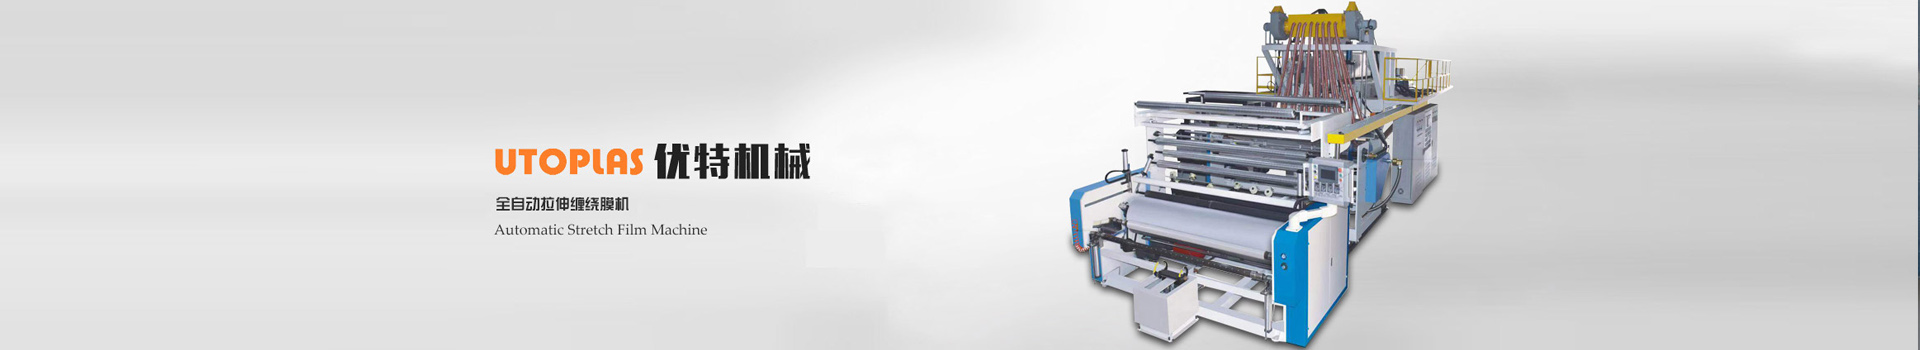 Plastic packaging machinery manufacturer